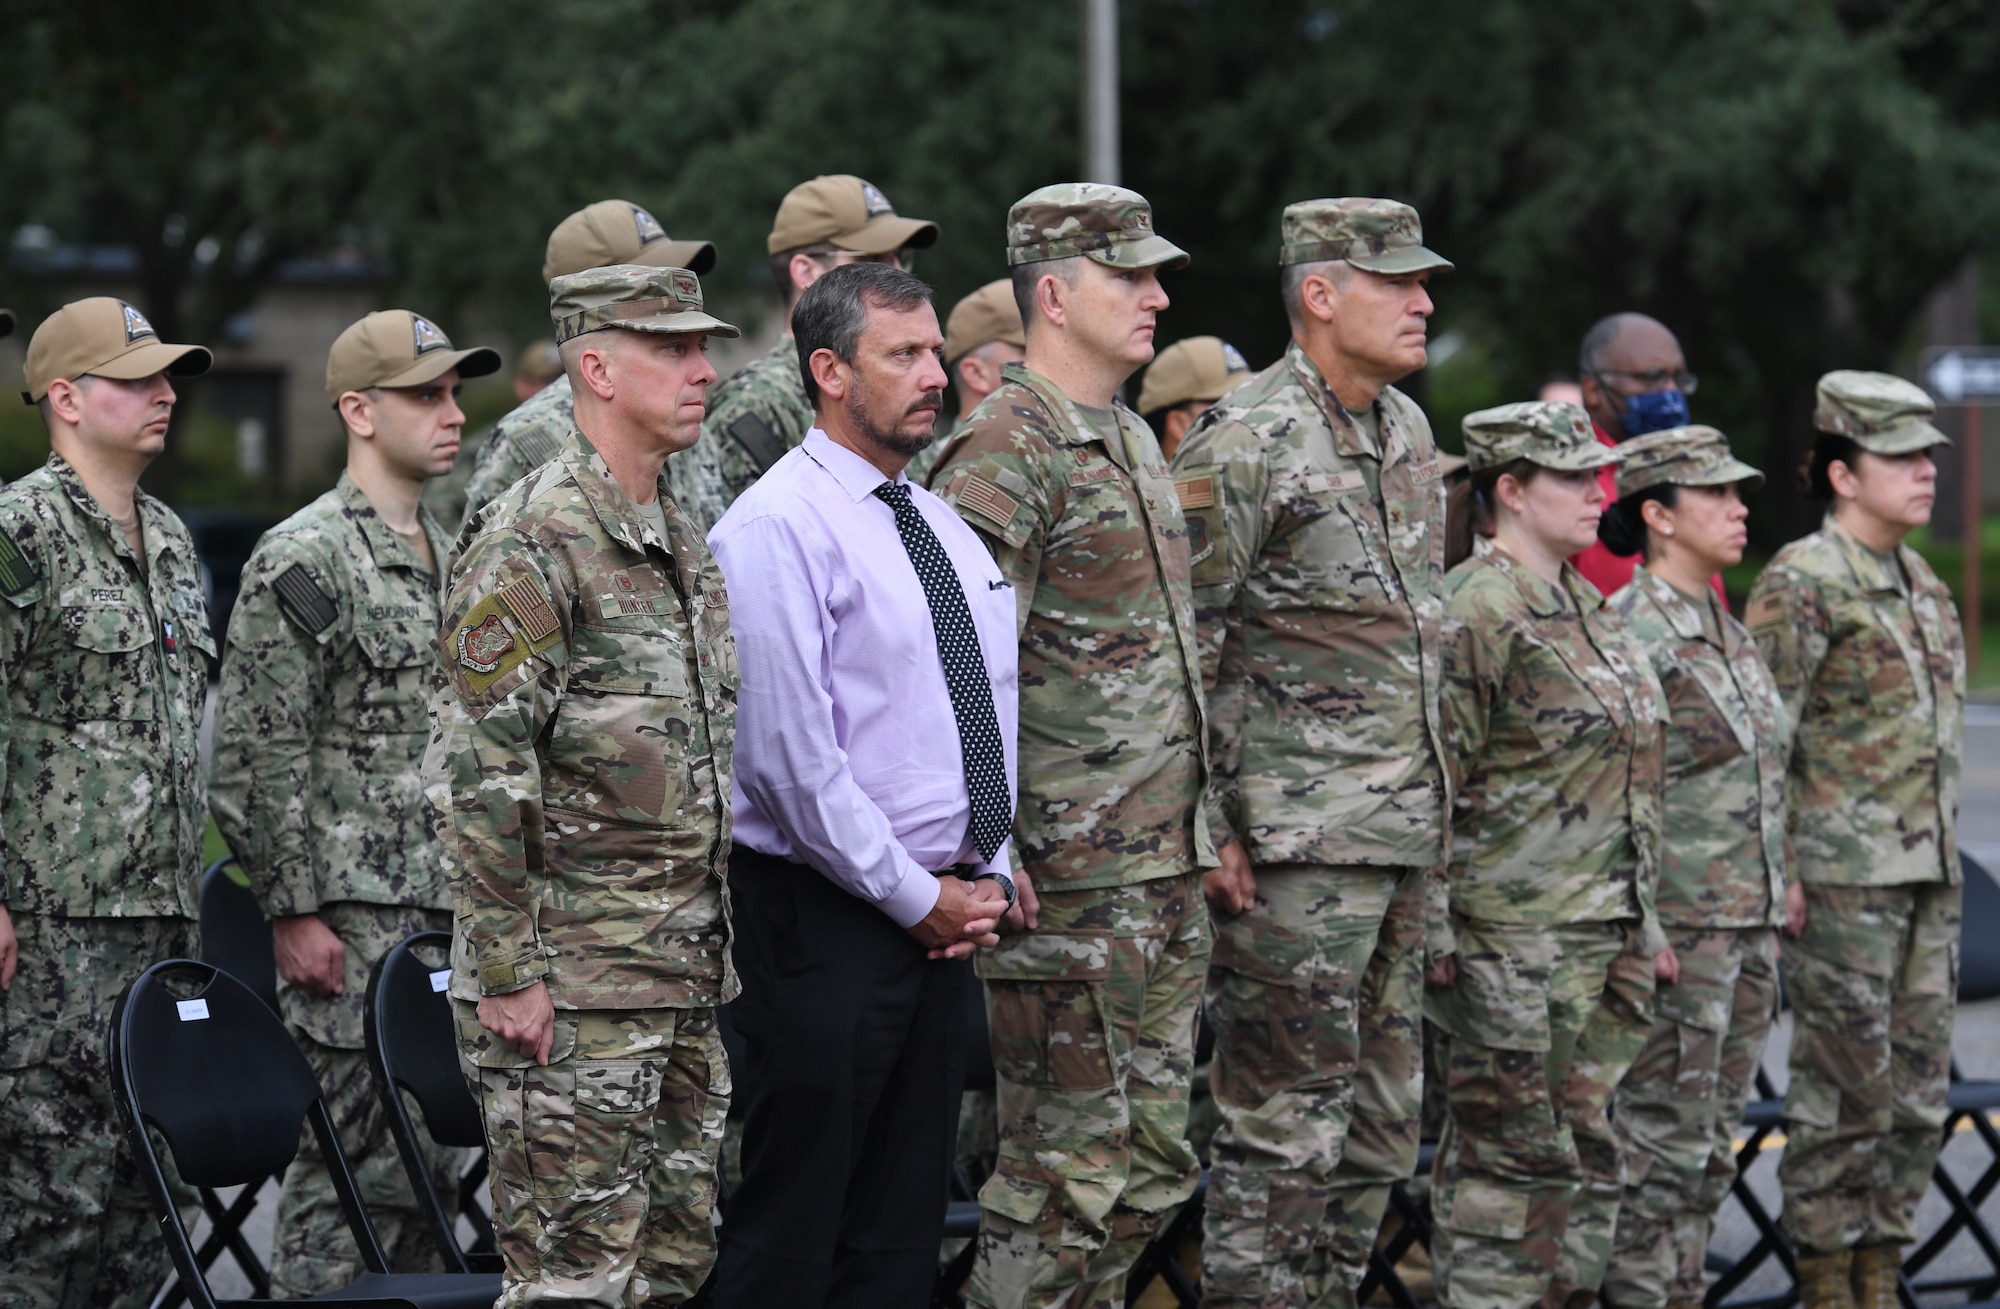 Keesler leadership attend a 9/11 ceremony in front of the 81st Training Wing headquarters building at Keesler Air Force Base, Mississippi, Sept. 9, 2022. The event honored those who lost their lives during the 9/11 attacks. (U.S. Air Force photo by Kemberly Groue)